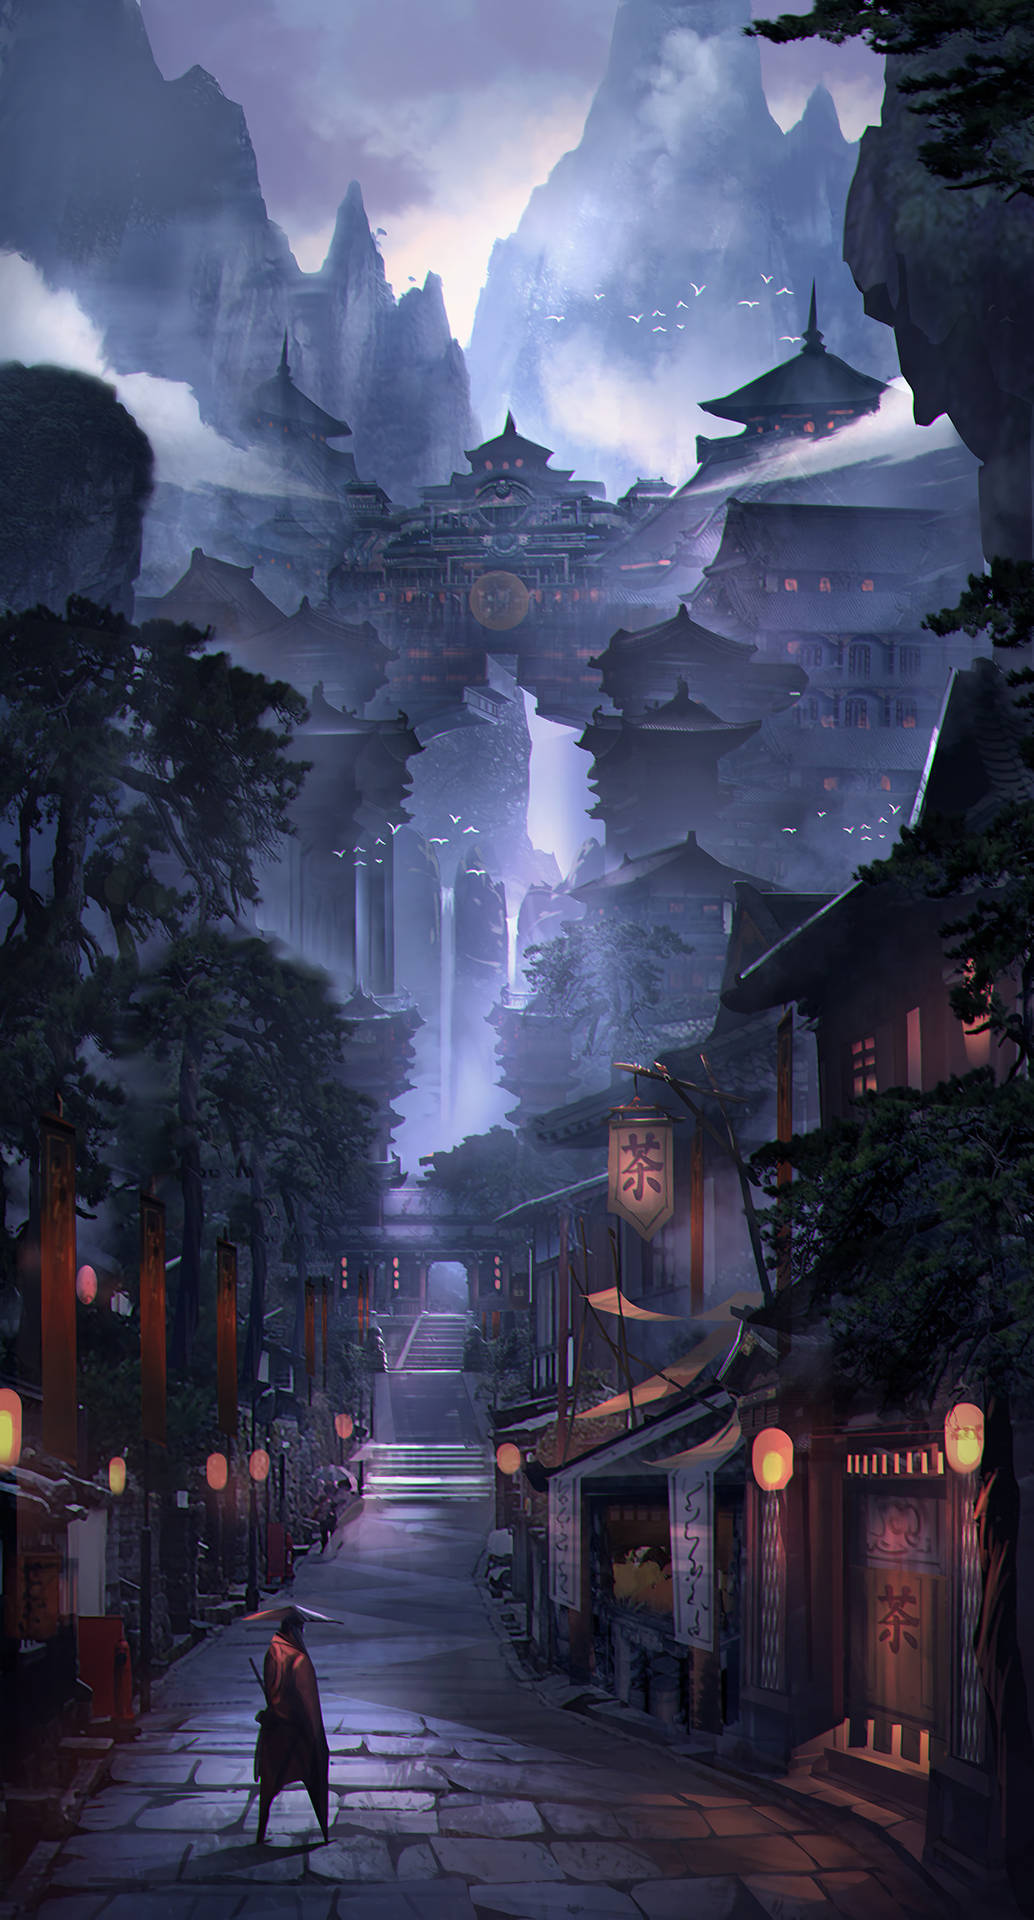 A lone samurai stands in a historic Japanese alleyway. Wallpaper